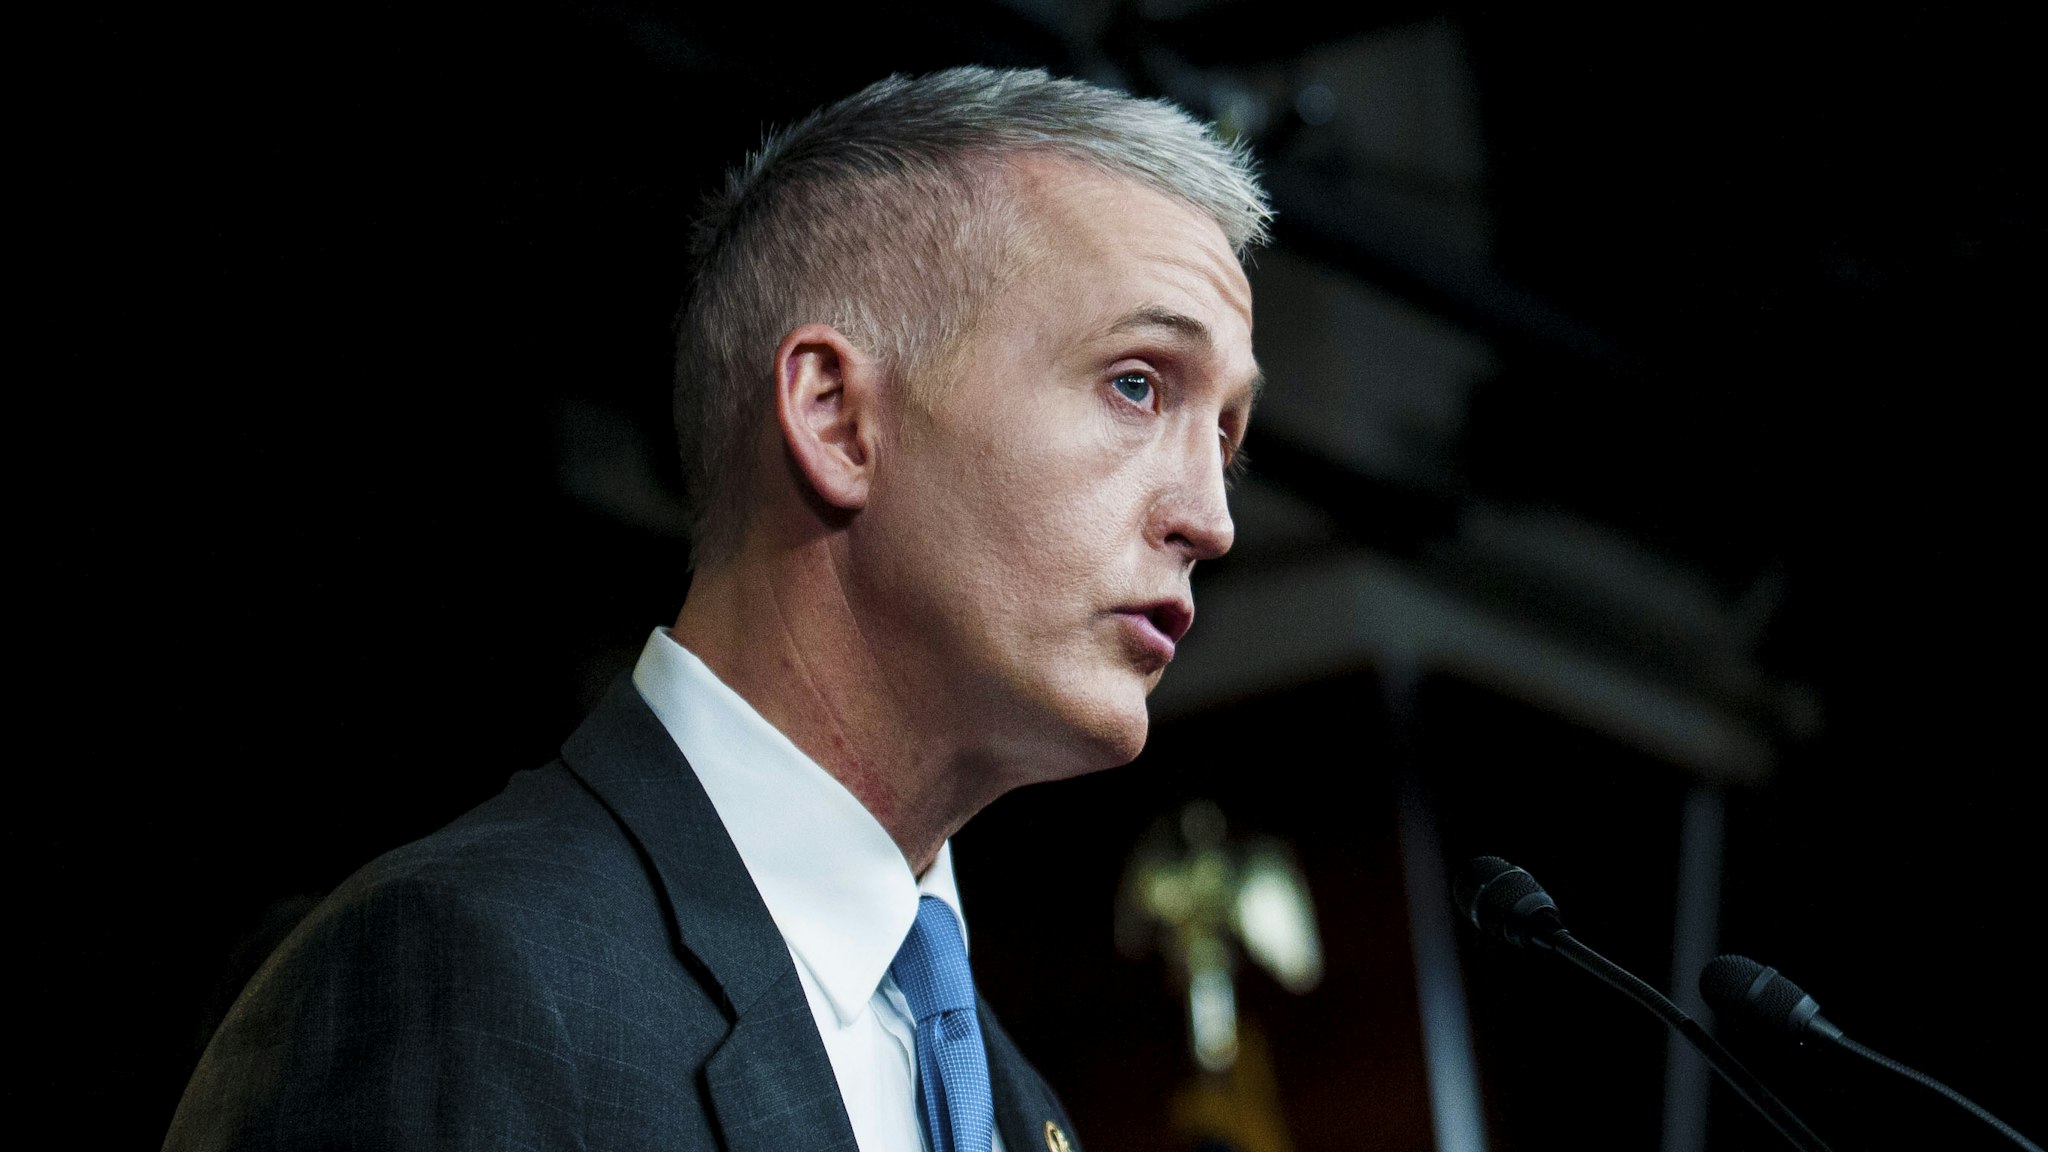 WASHINGTON, DC - MARCH 03: Chairman Trey Gowdy (R-SC) of the House Select Committee on Benghazi speaks to reporters at a press conference on the findings of former Secretary of State Hillary Clinton's personal emails at the U.S. Capitol on March 3, 2015 in Washington, D.C. The New York Times reported that Clinton may have violated the law by using a personal email account for official business at the State Department.